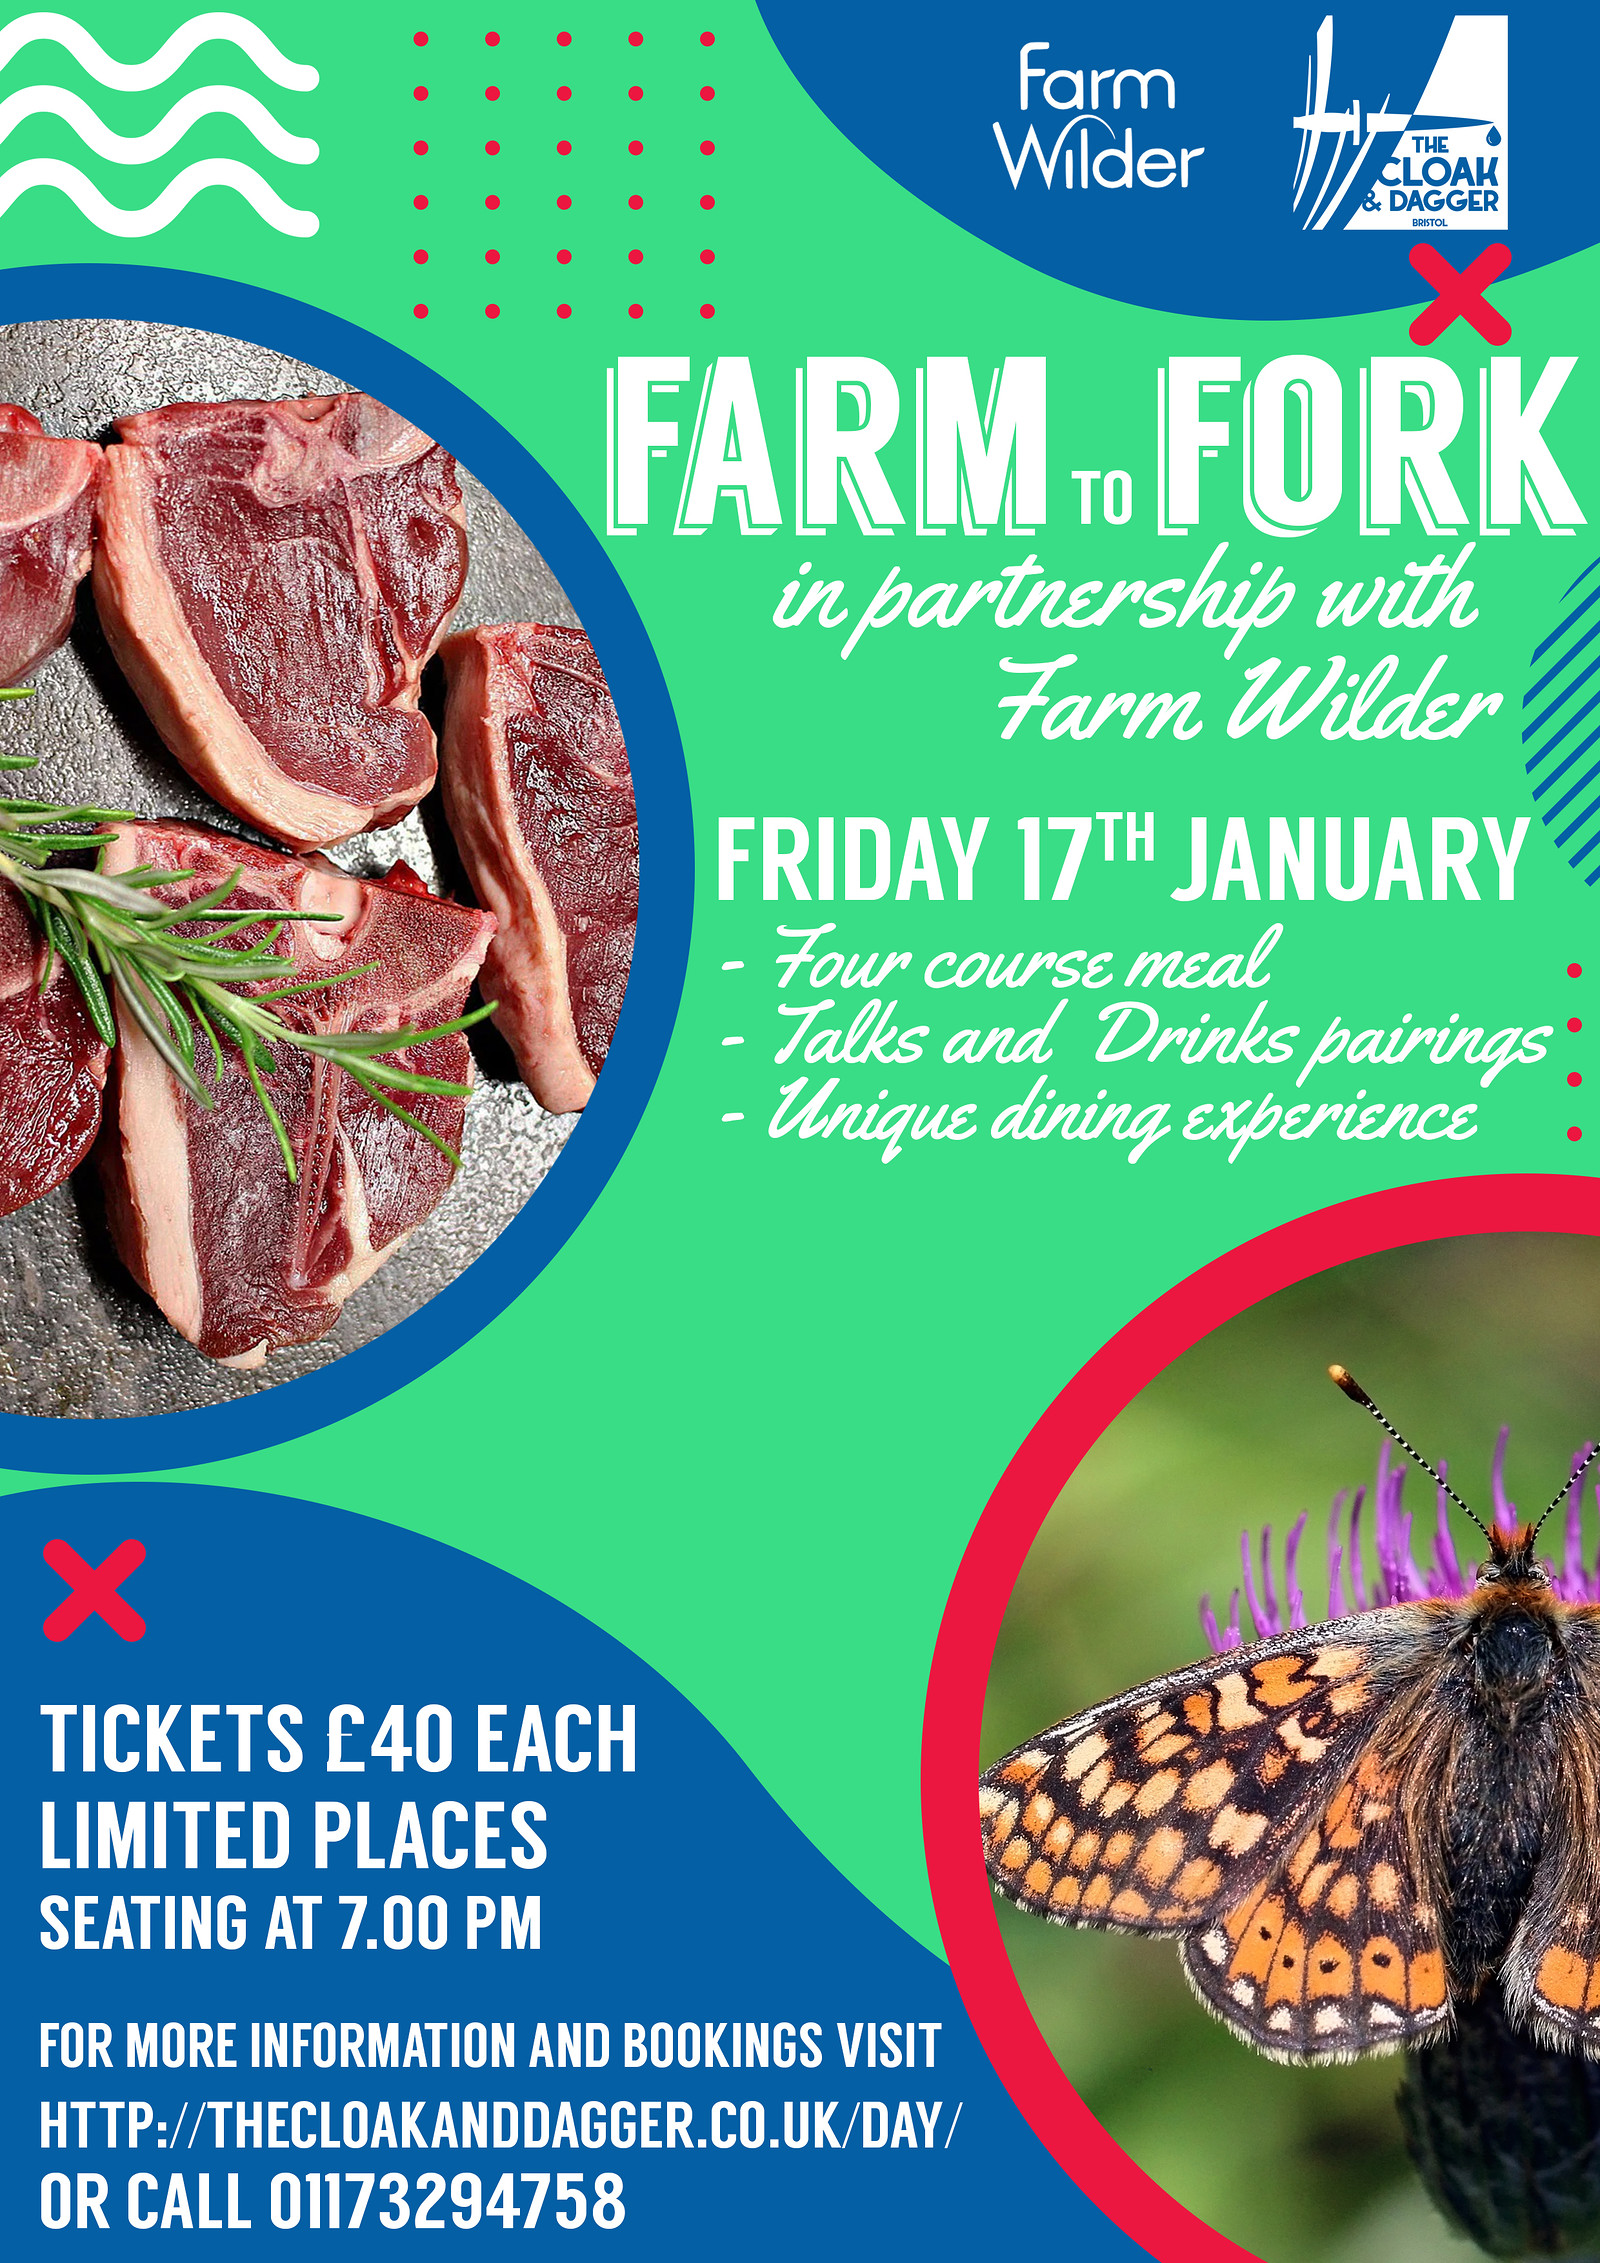 Farm to Fork in collaboration with Farm Wilder at The Cloak and Dagger